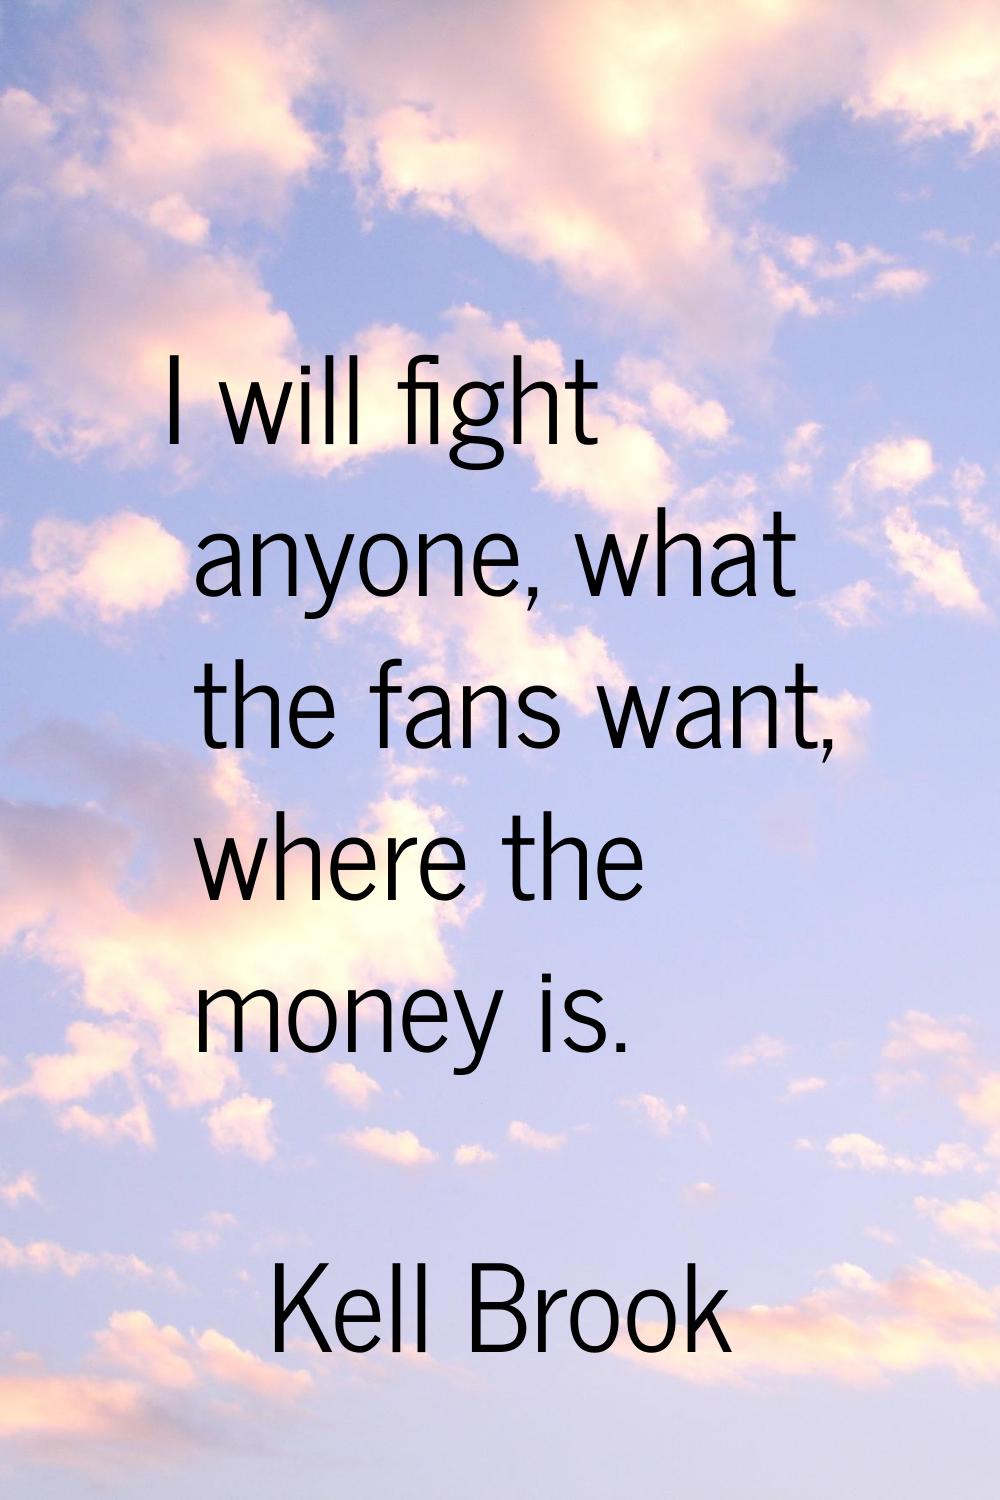 I will fight anyone, what the fans want, where the money is.